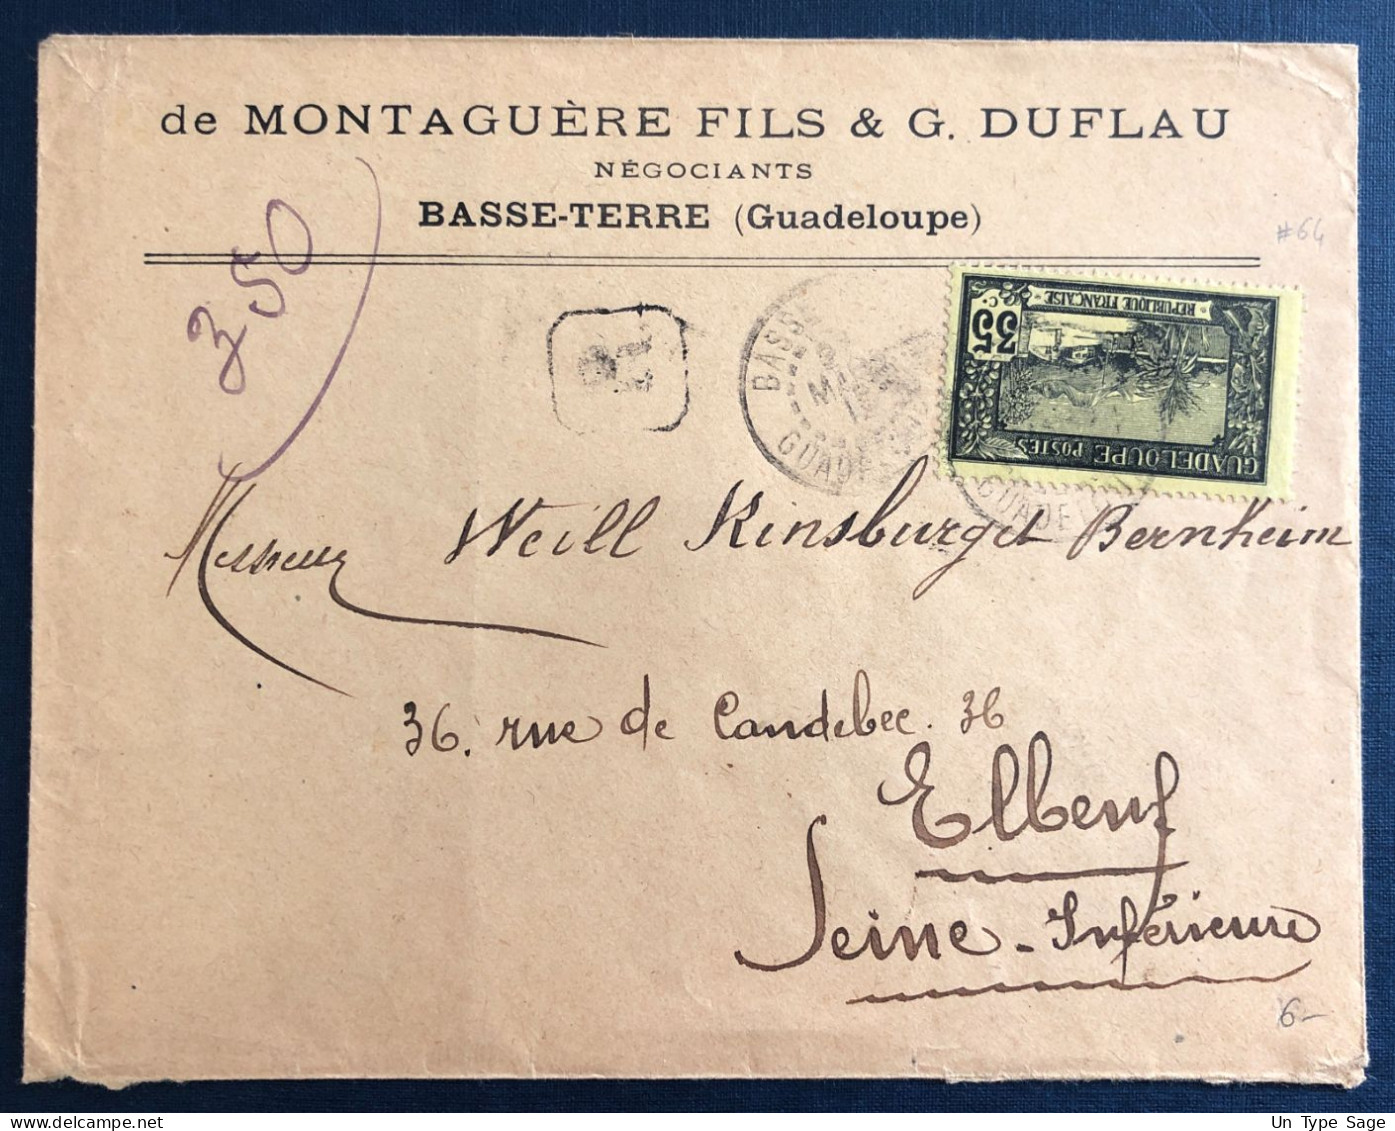 Guadeloupe, N°64 Sur Enveloppe TAD BASSE-TERRE 23.3.1915 - (B3315) - Covers & Documents